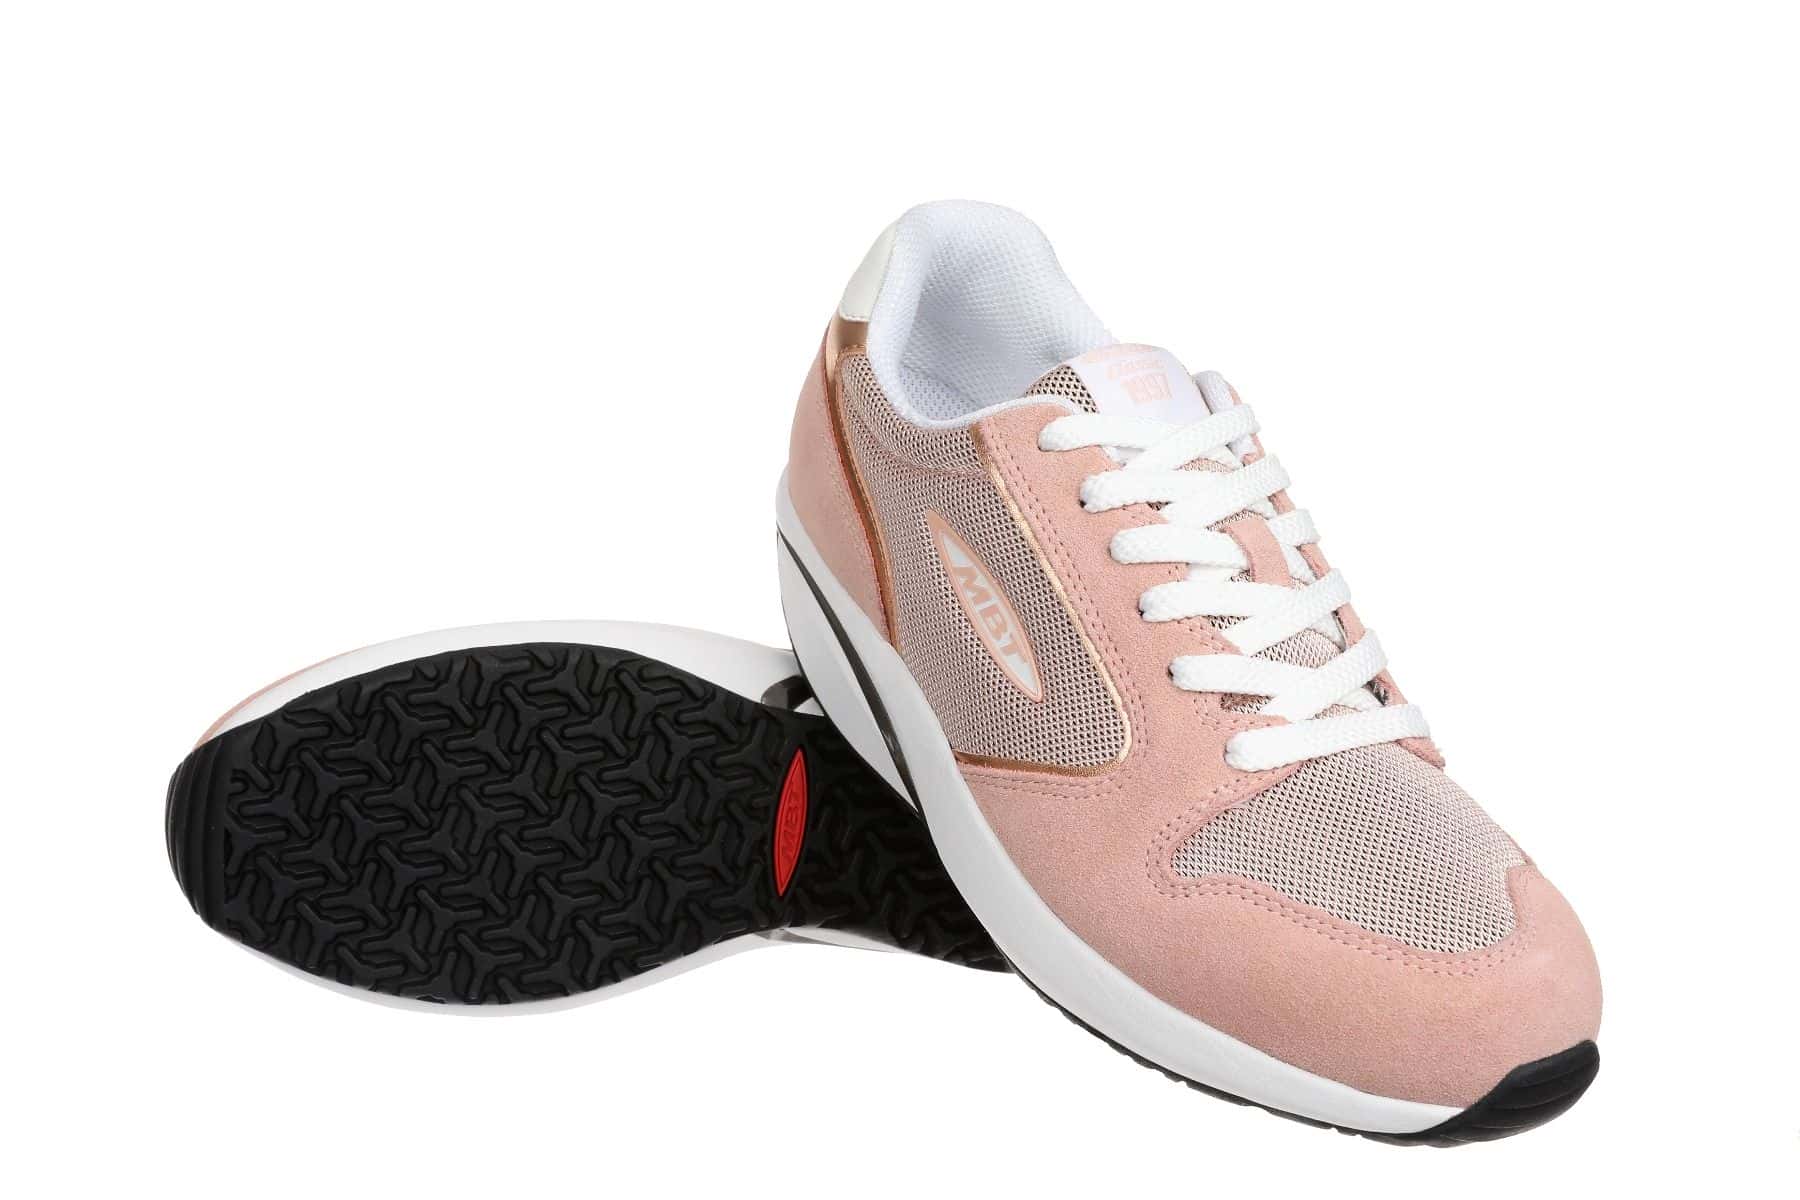 MBT MBT-1997 CLASSIC SNEAKERS WOMAN